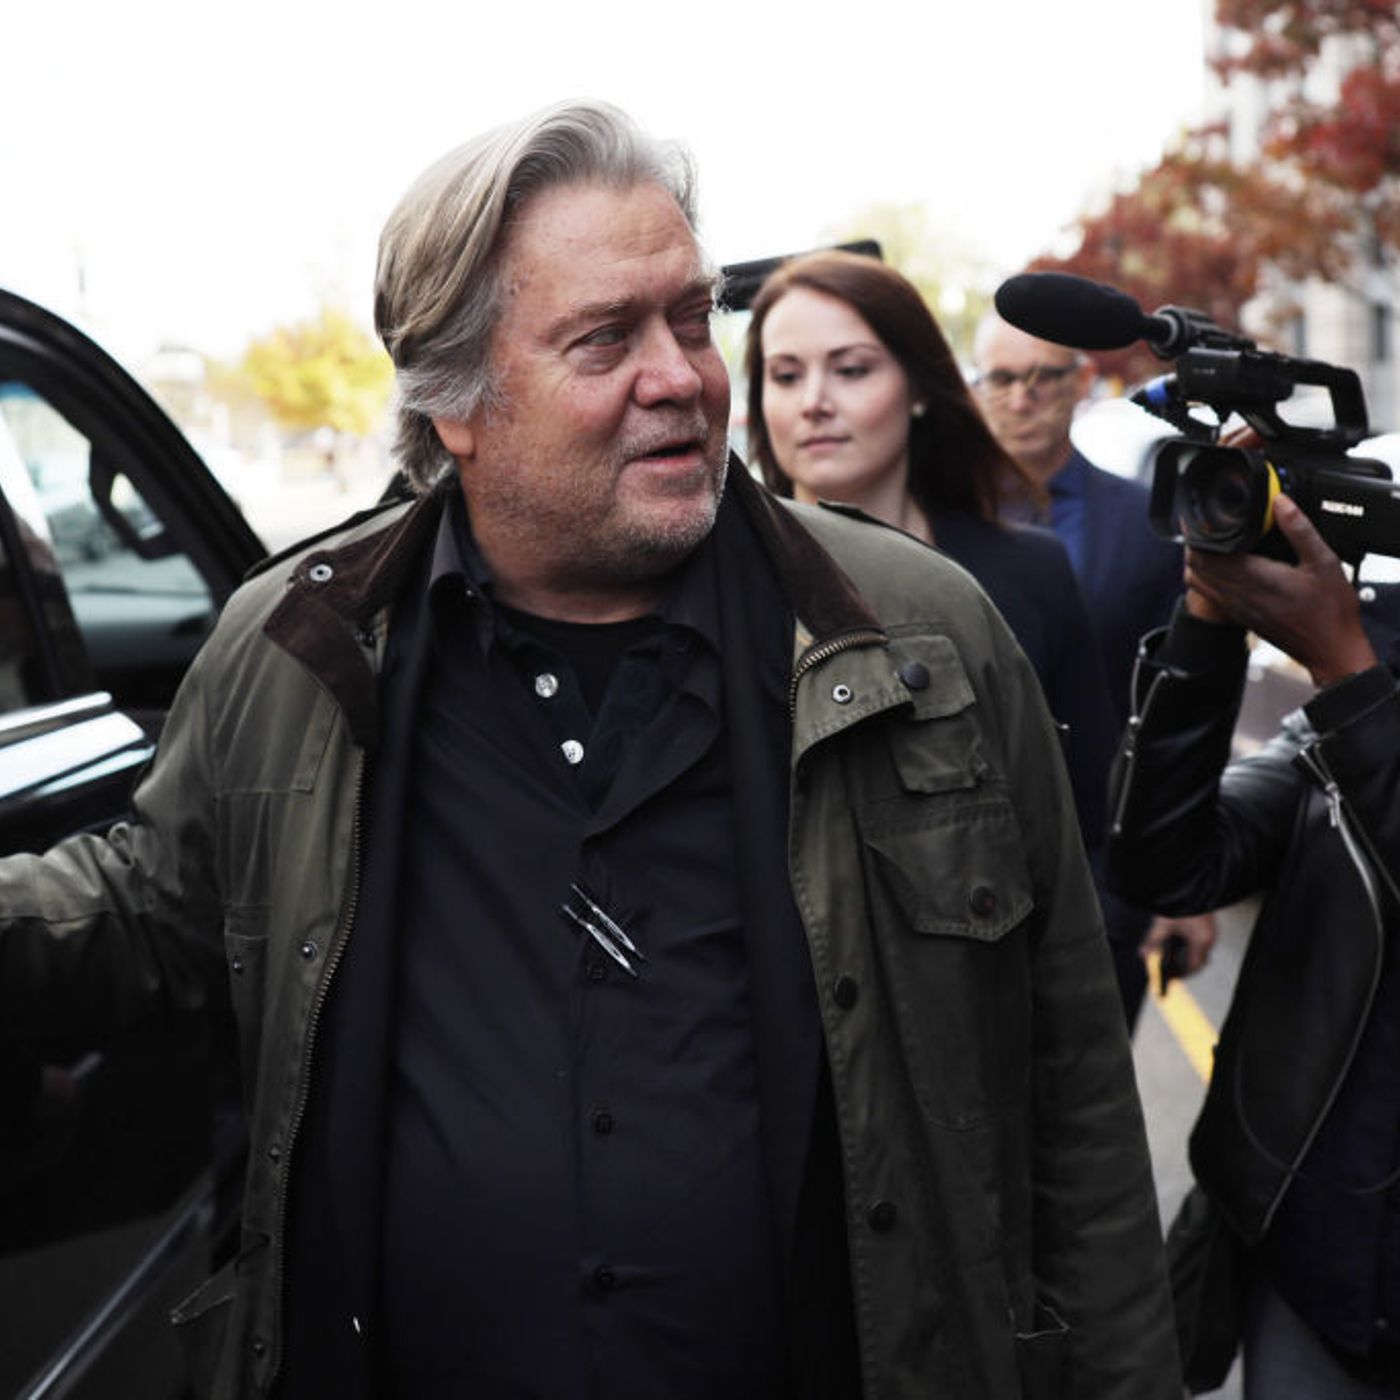 What’s going on in Steve Bannon’s head?